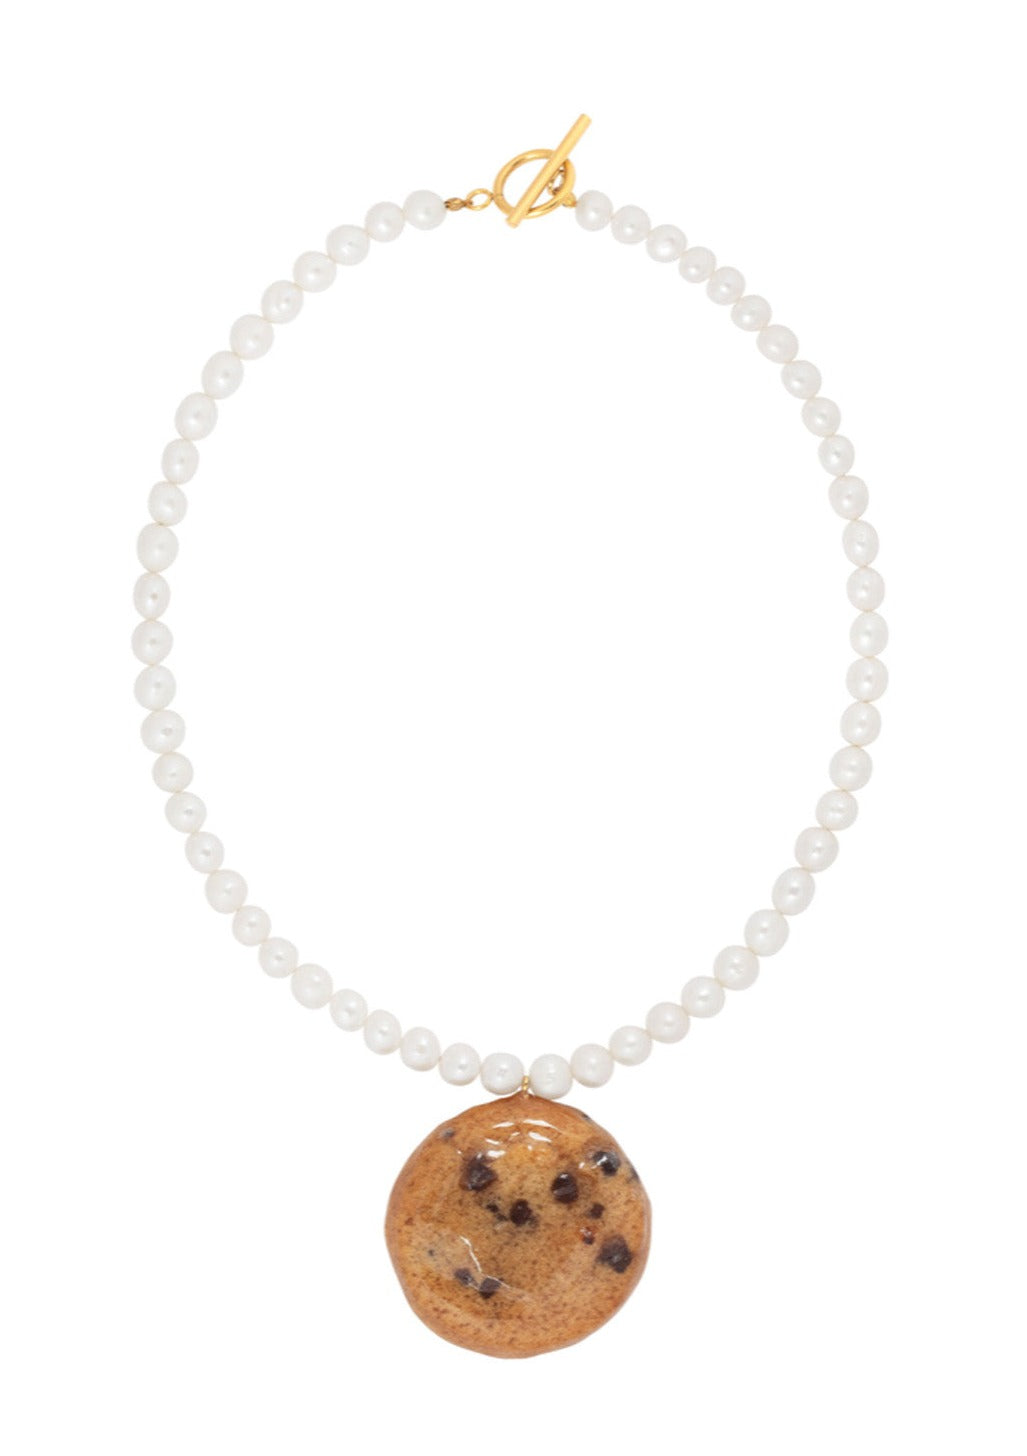 Resin coated cookie on beaded pearl necklace with gold clasp.